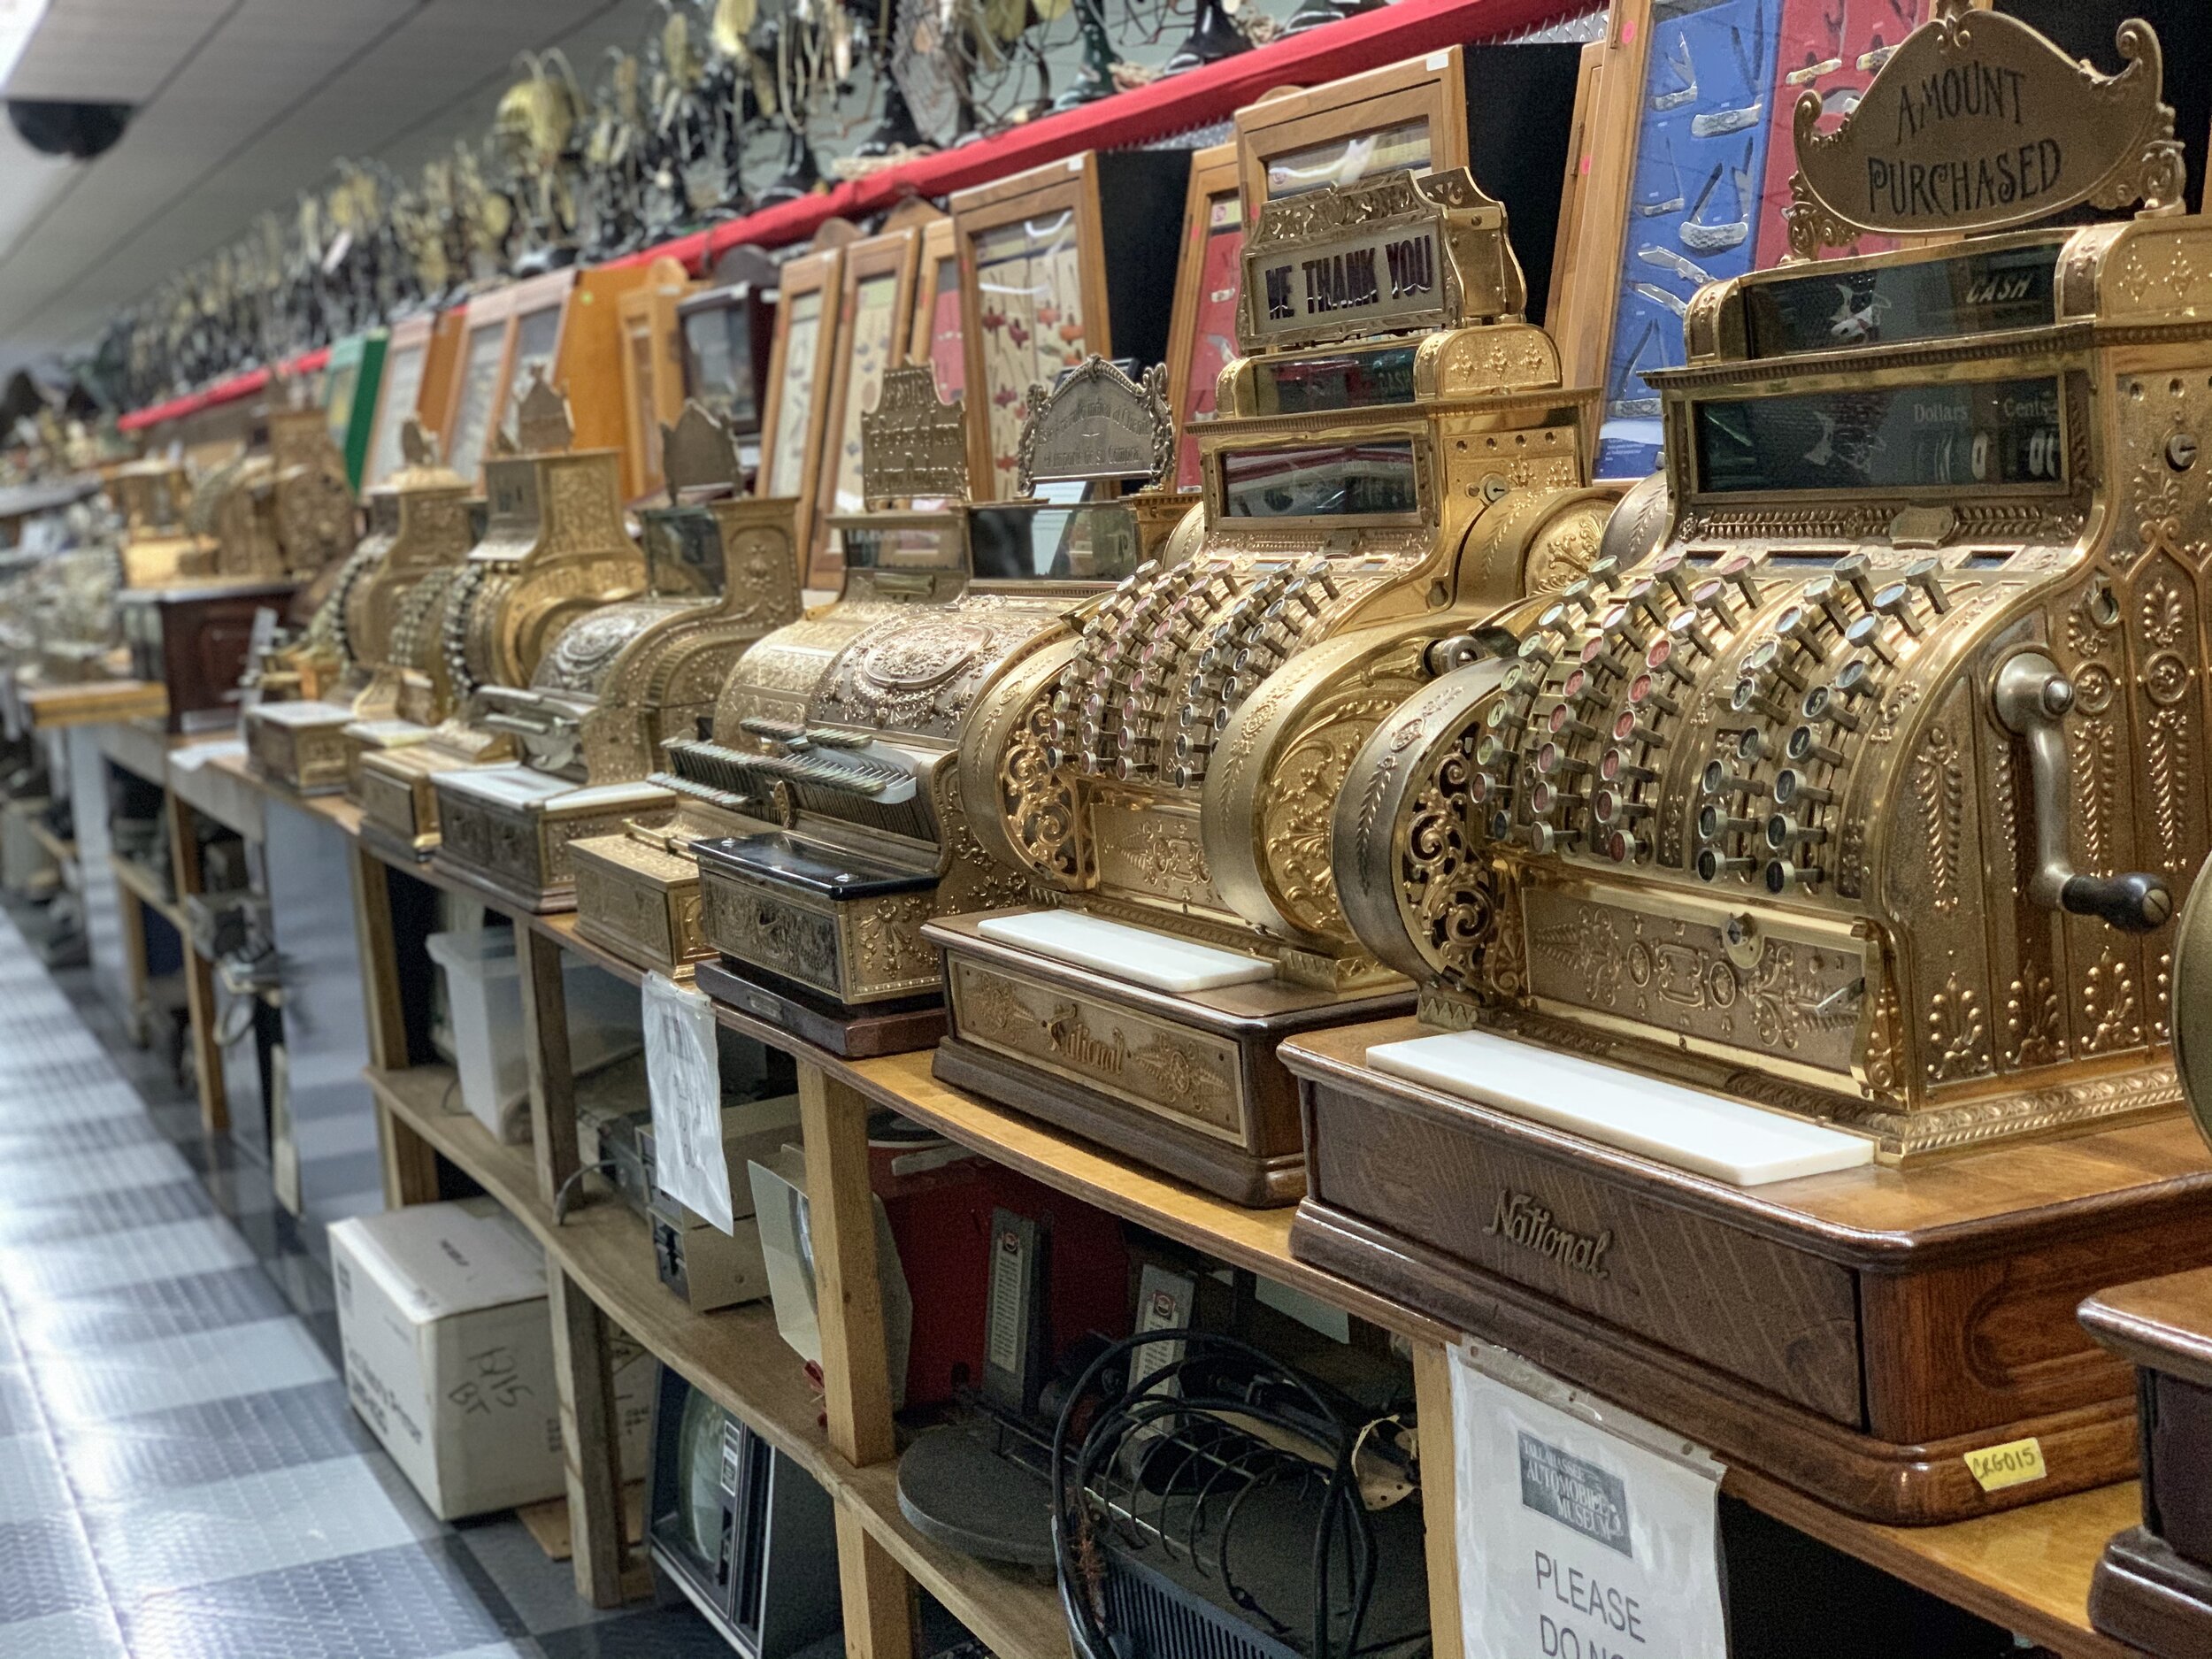  …lots of cash registers…and antique adding machines, typewriters, and telephones of all ages! 